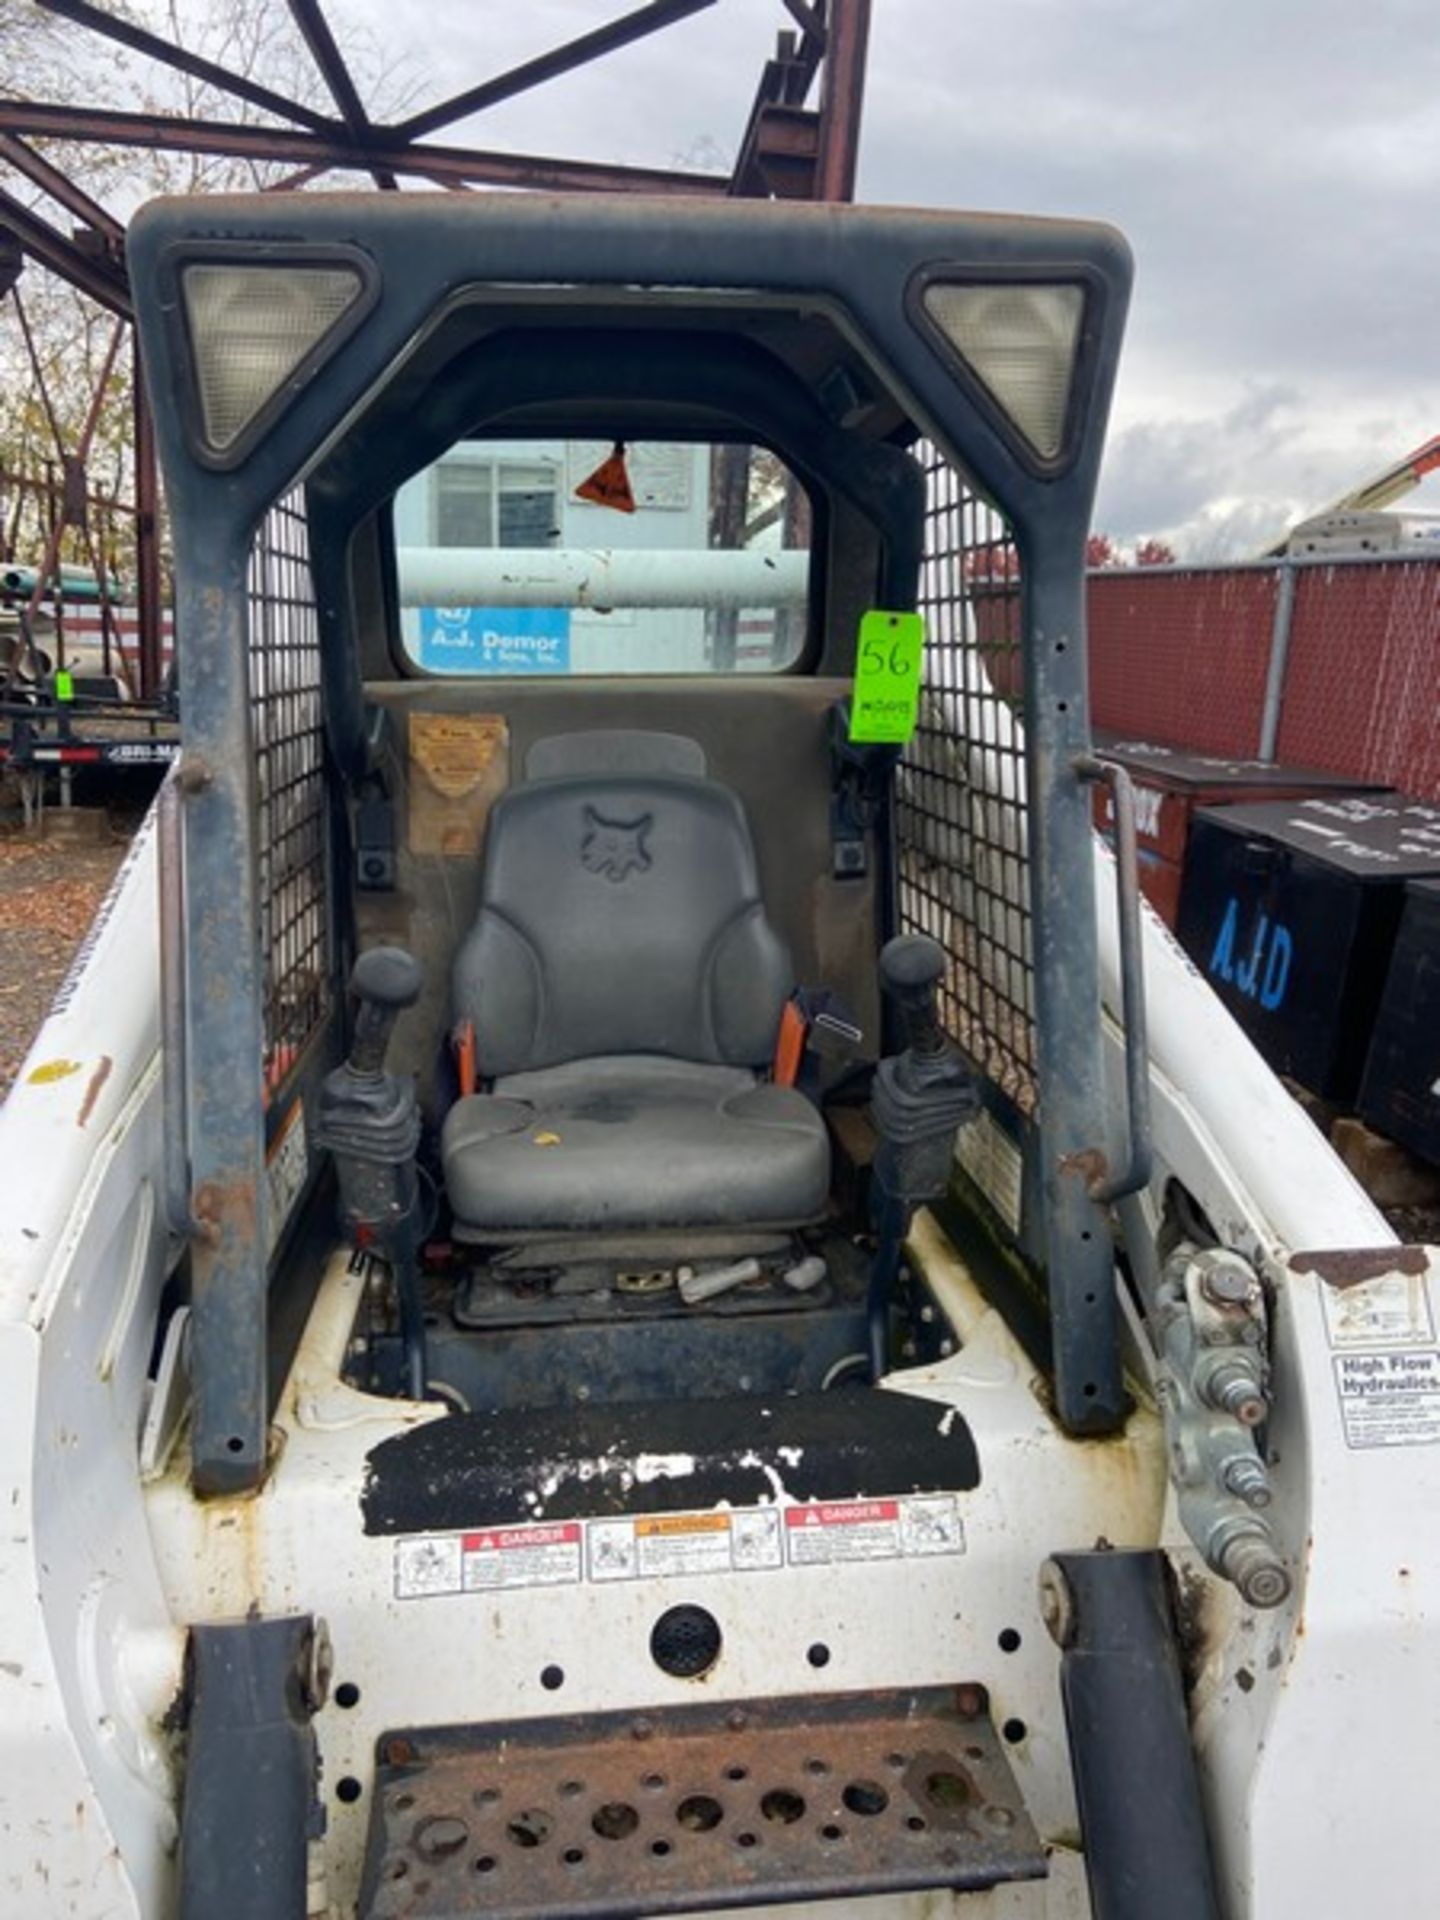 2010 Bobcat S250 Compact Skid Steer, VIN#: A5GM36985, with Fork Attachment (NOTE: DELAYED REMOVAL - Bild 5 aus 12